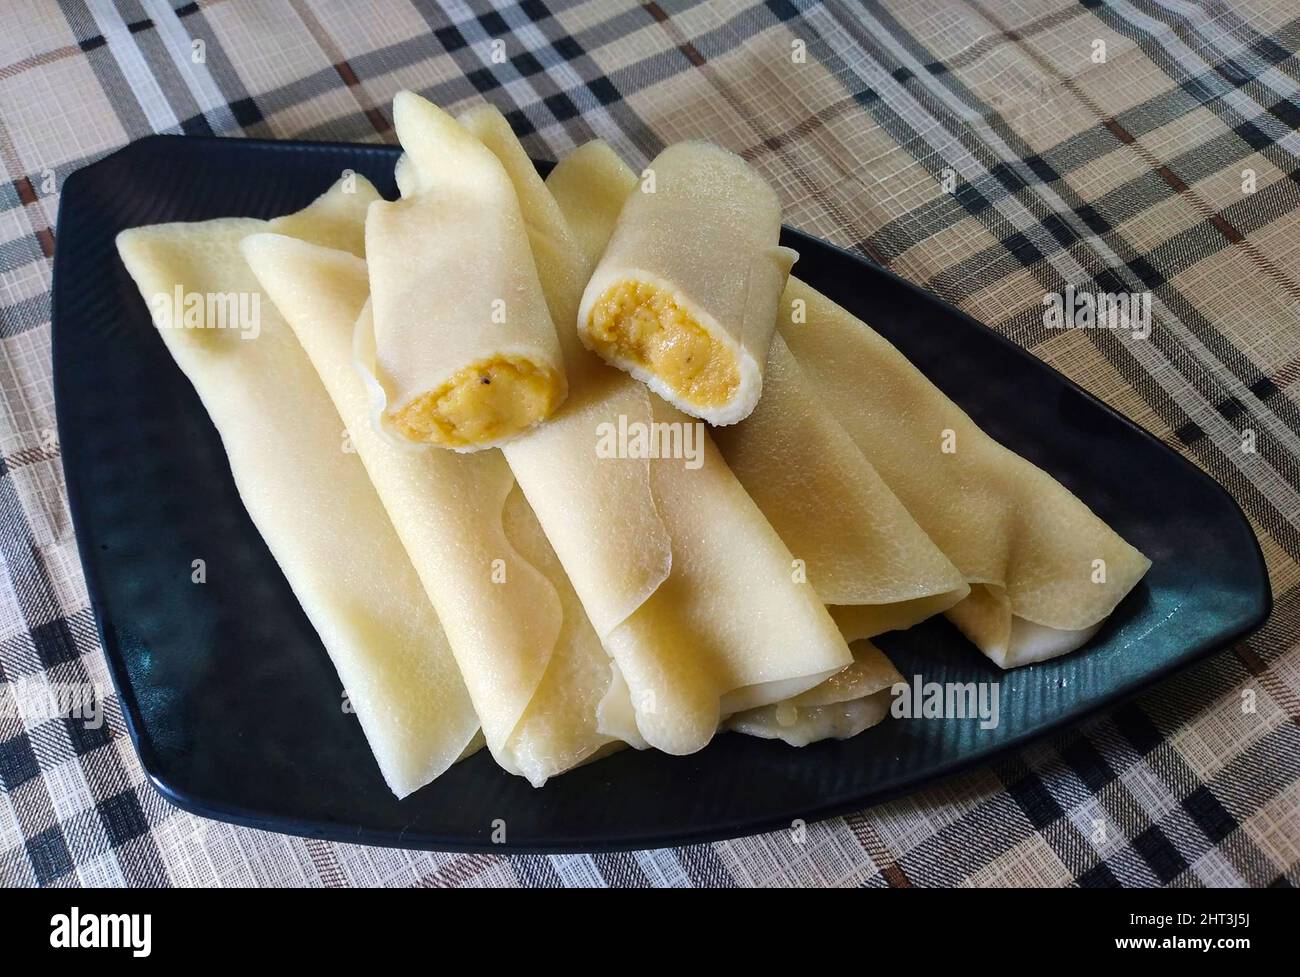 Crepes filled with kheer or a coconut-and-gur mixture Stock Photo